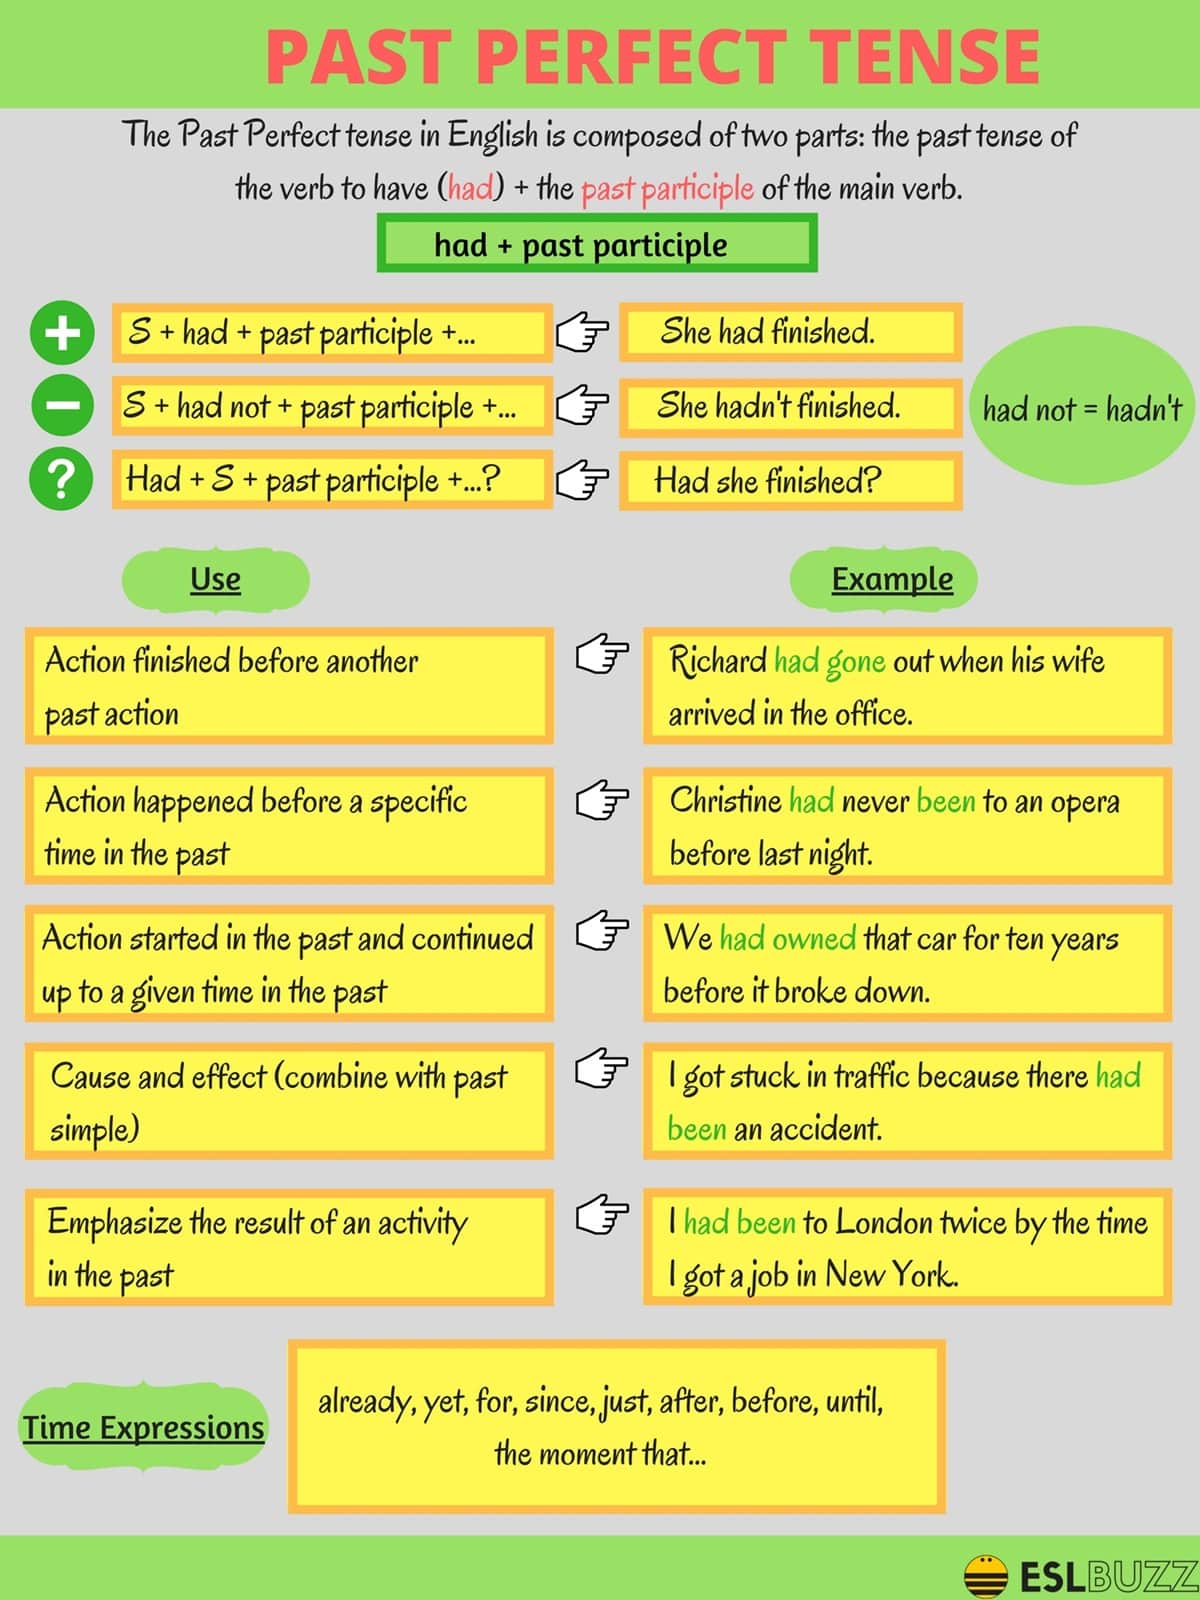 Learn the 12 Verb Tenses in English Grammar with Helpful Pictures 4